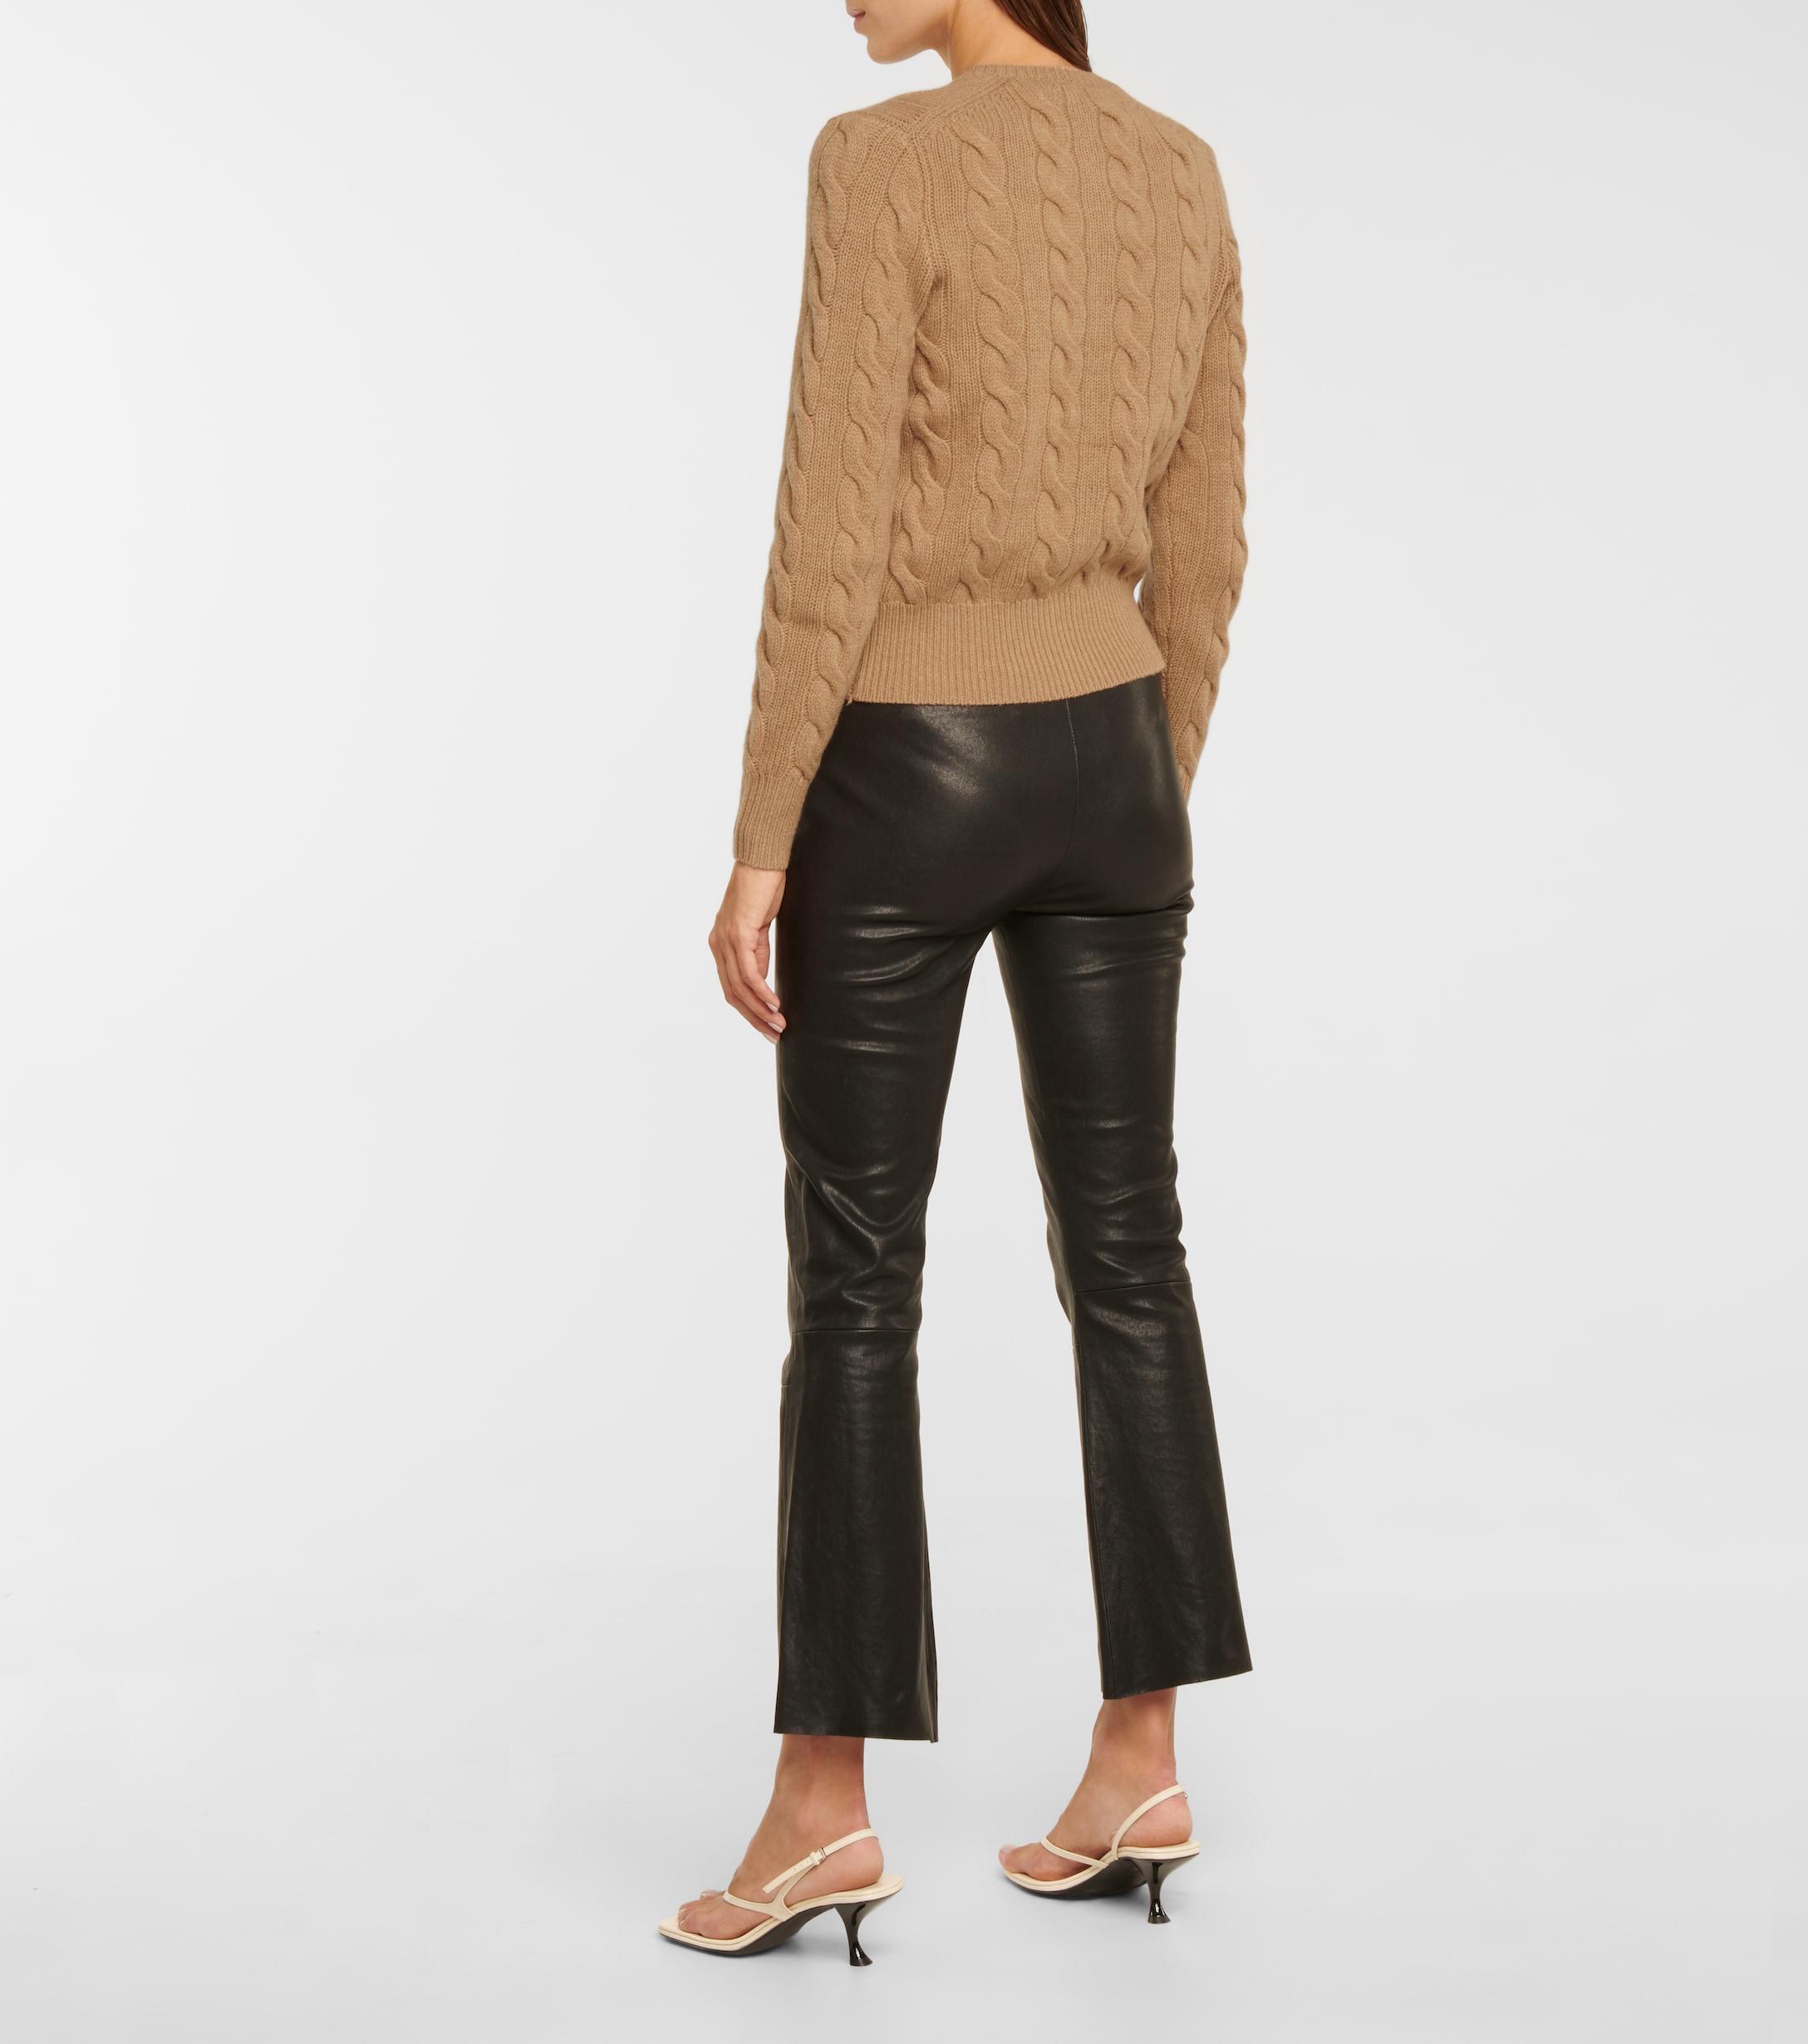 Polo Ralph Lauren Cable-knit Wool And Cashmere Cardigan in Natural | Lyst